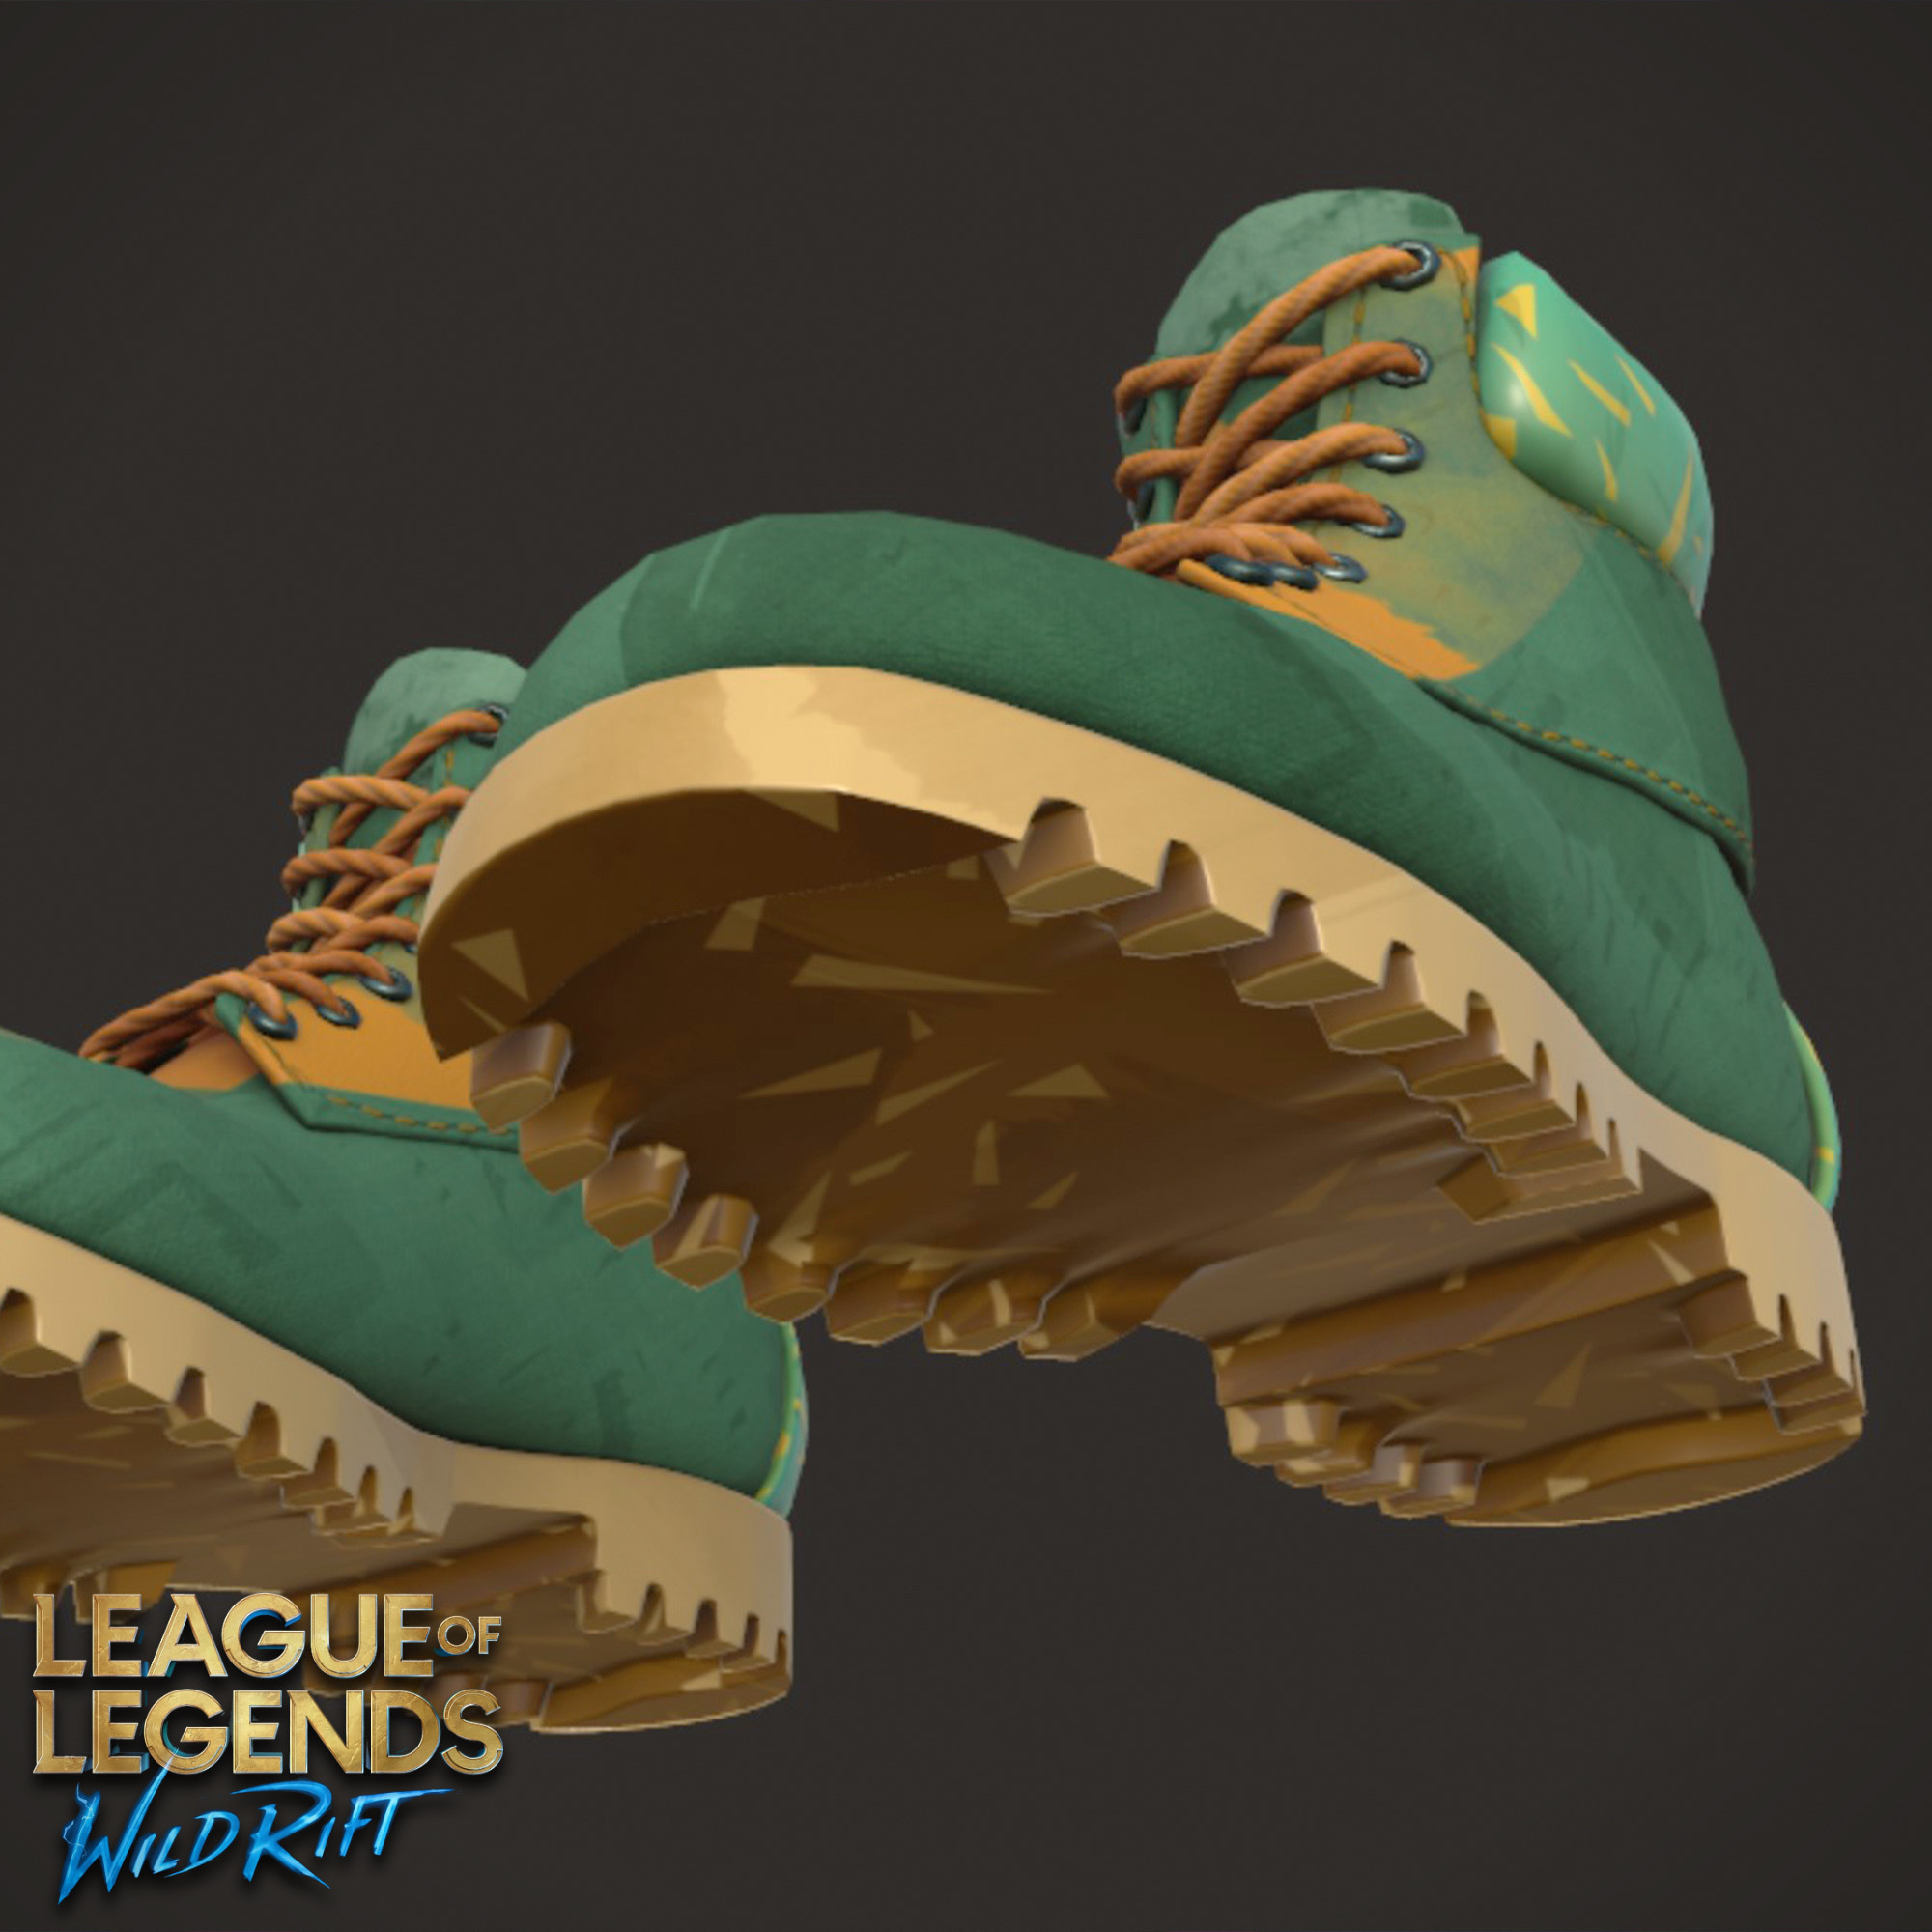 Realtime Preview of the Boots. 